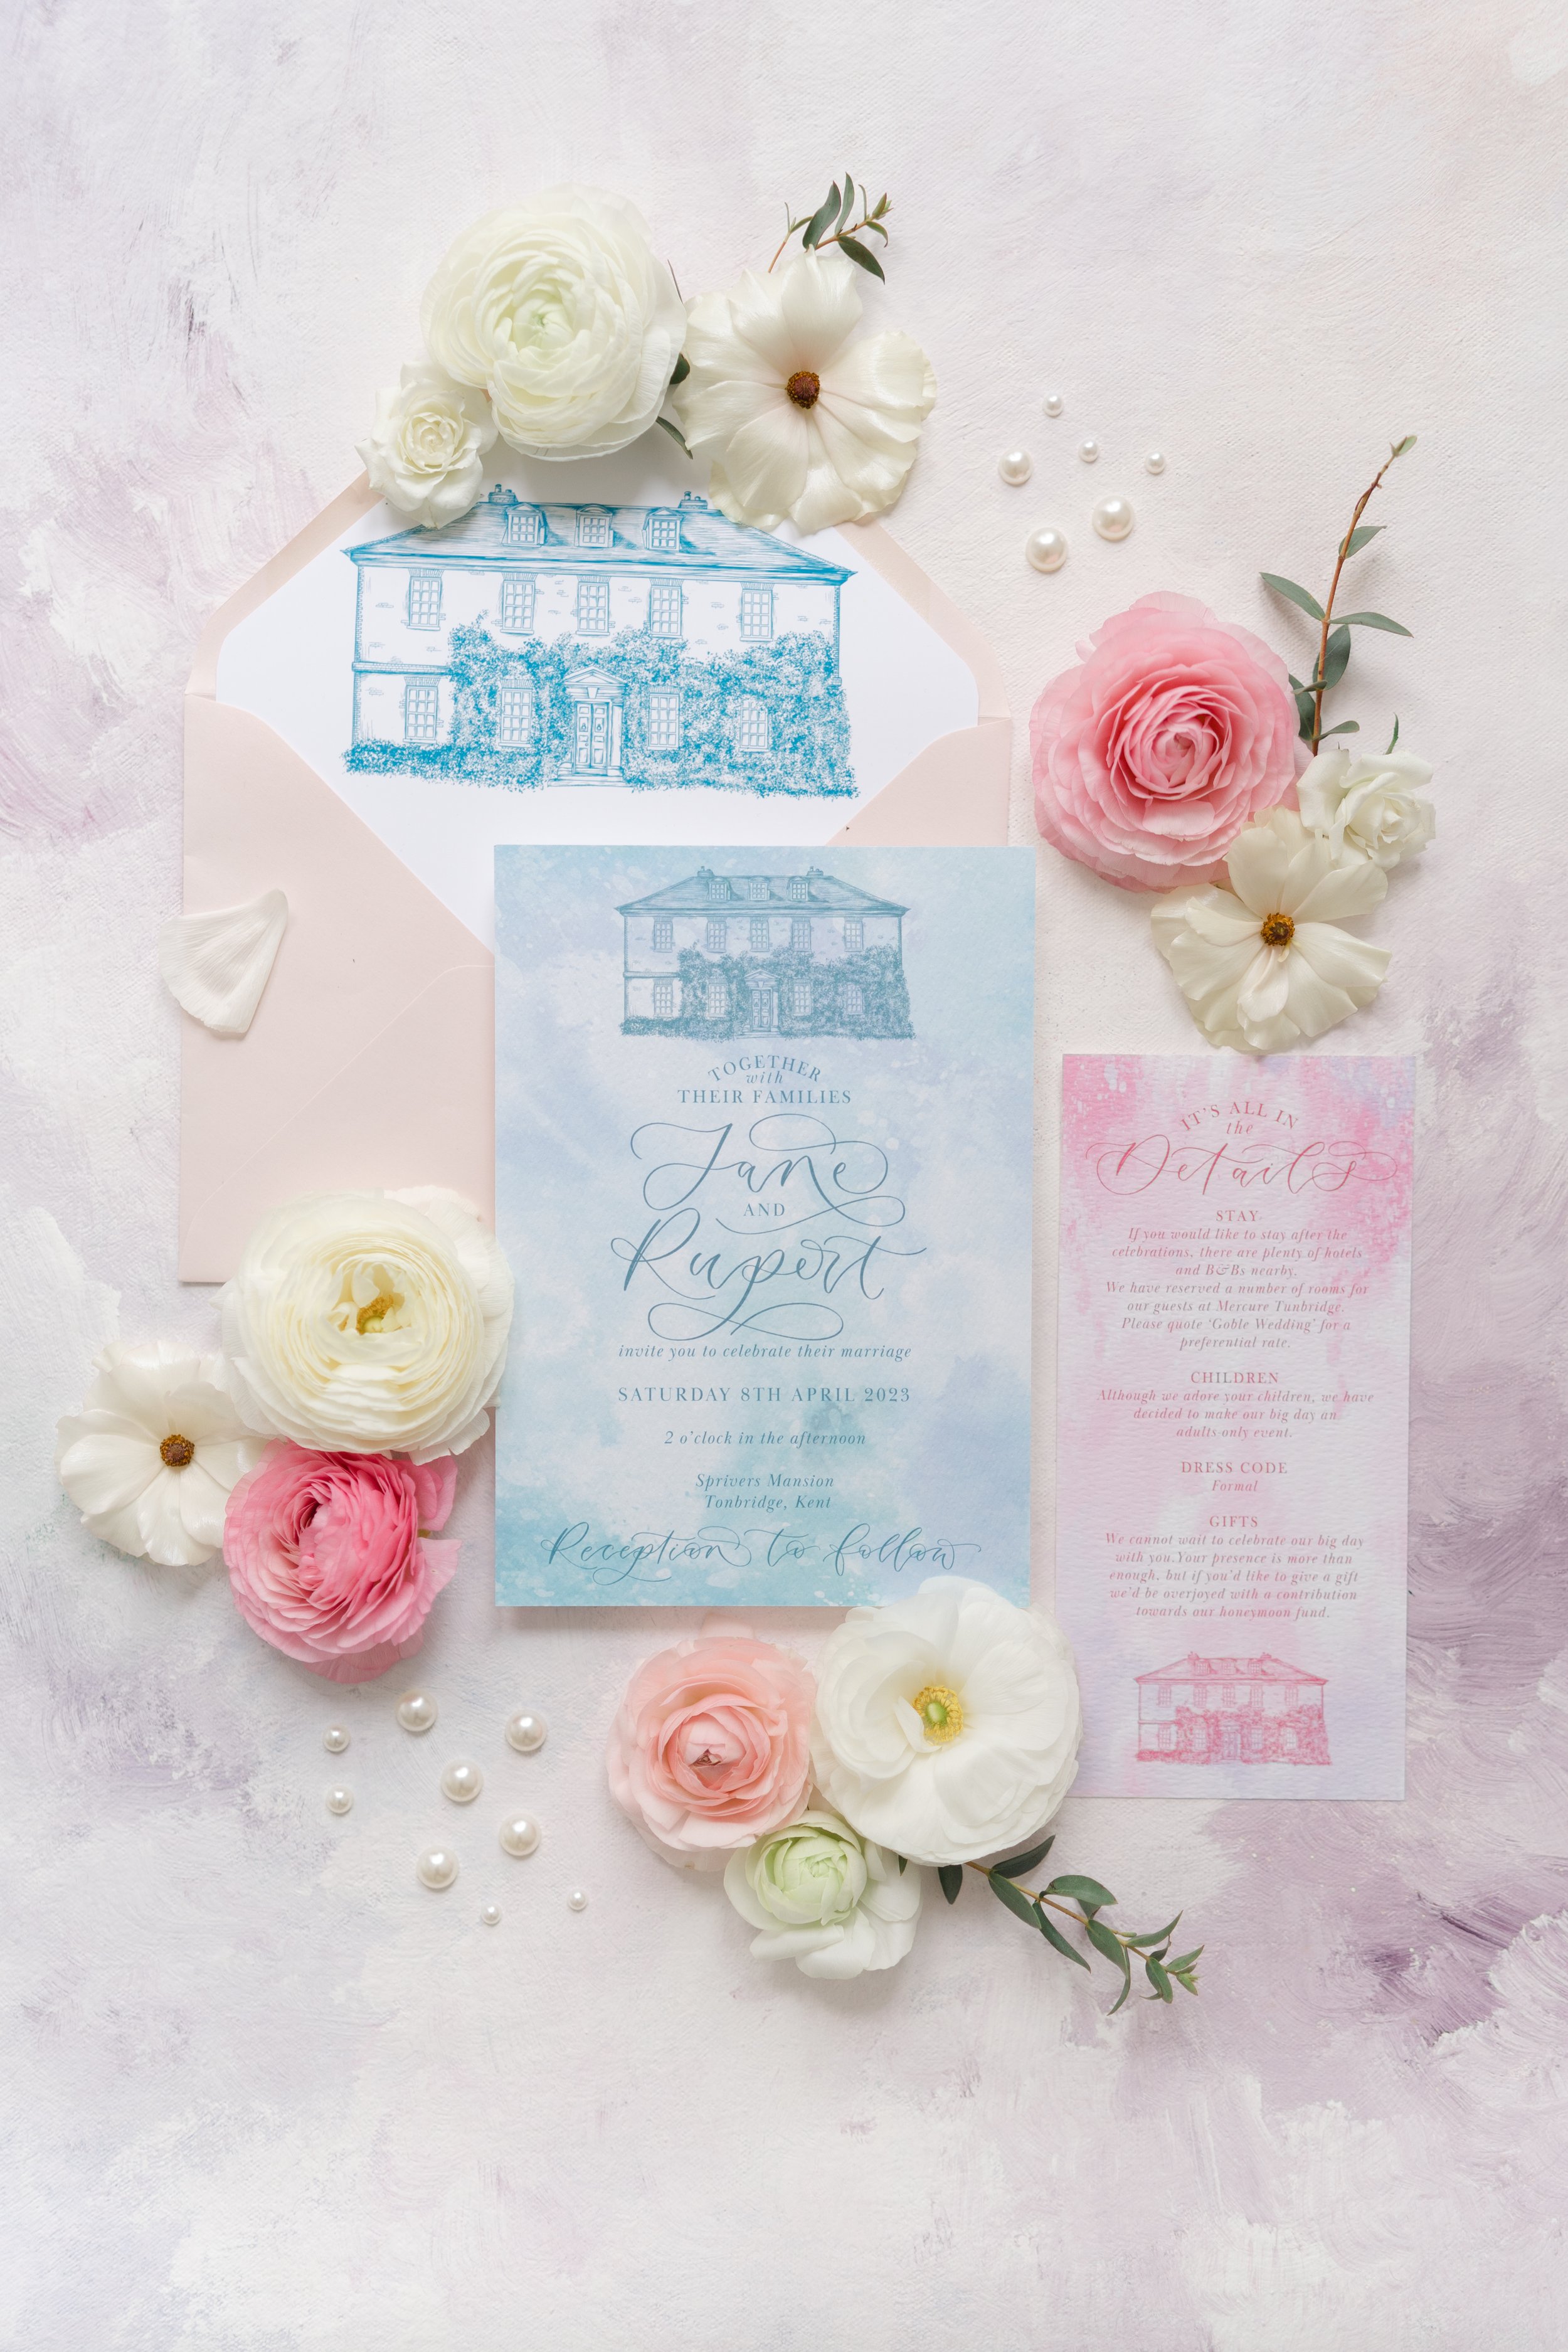 The Amyverse - pastel invitation set with invite, envelope liner  details card, rsvp card with pastel watercolour washes and venue illustration of sprivers mansion.jpg